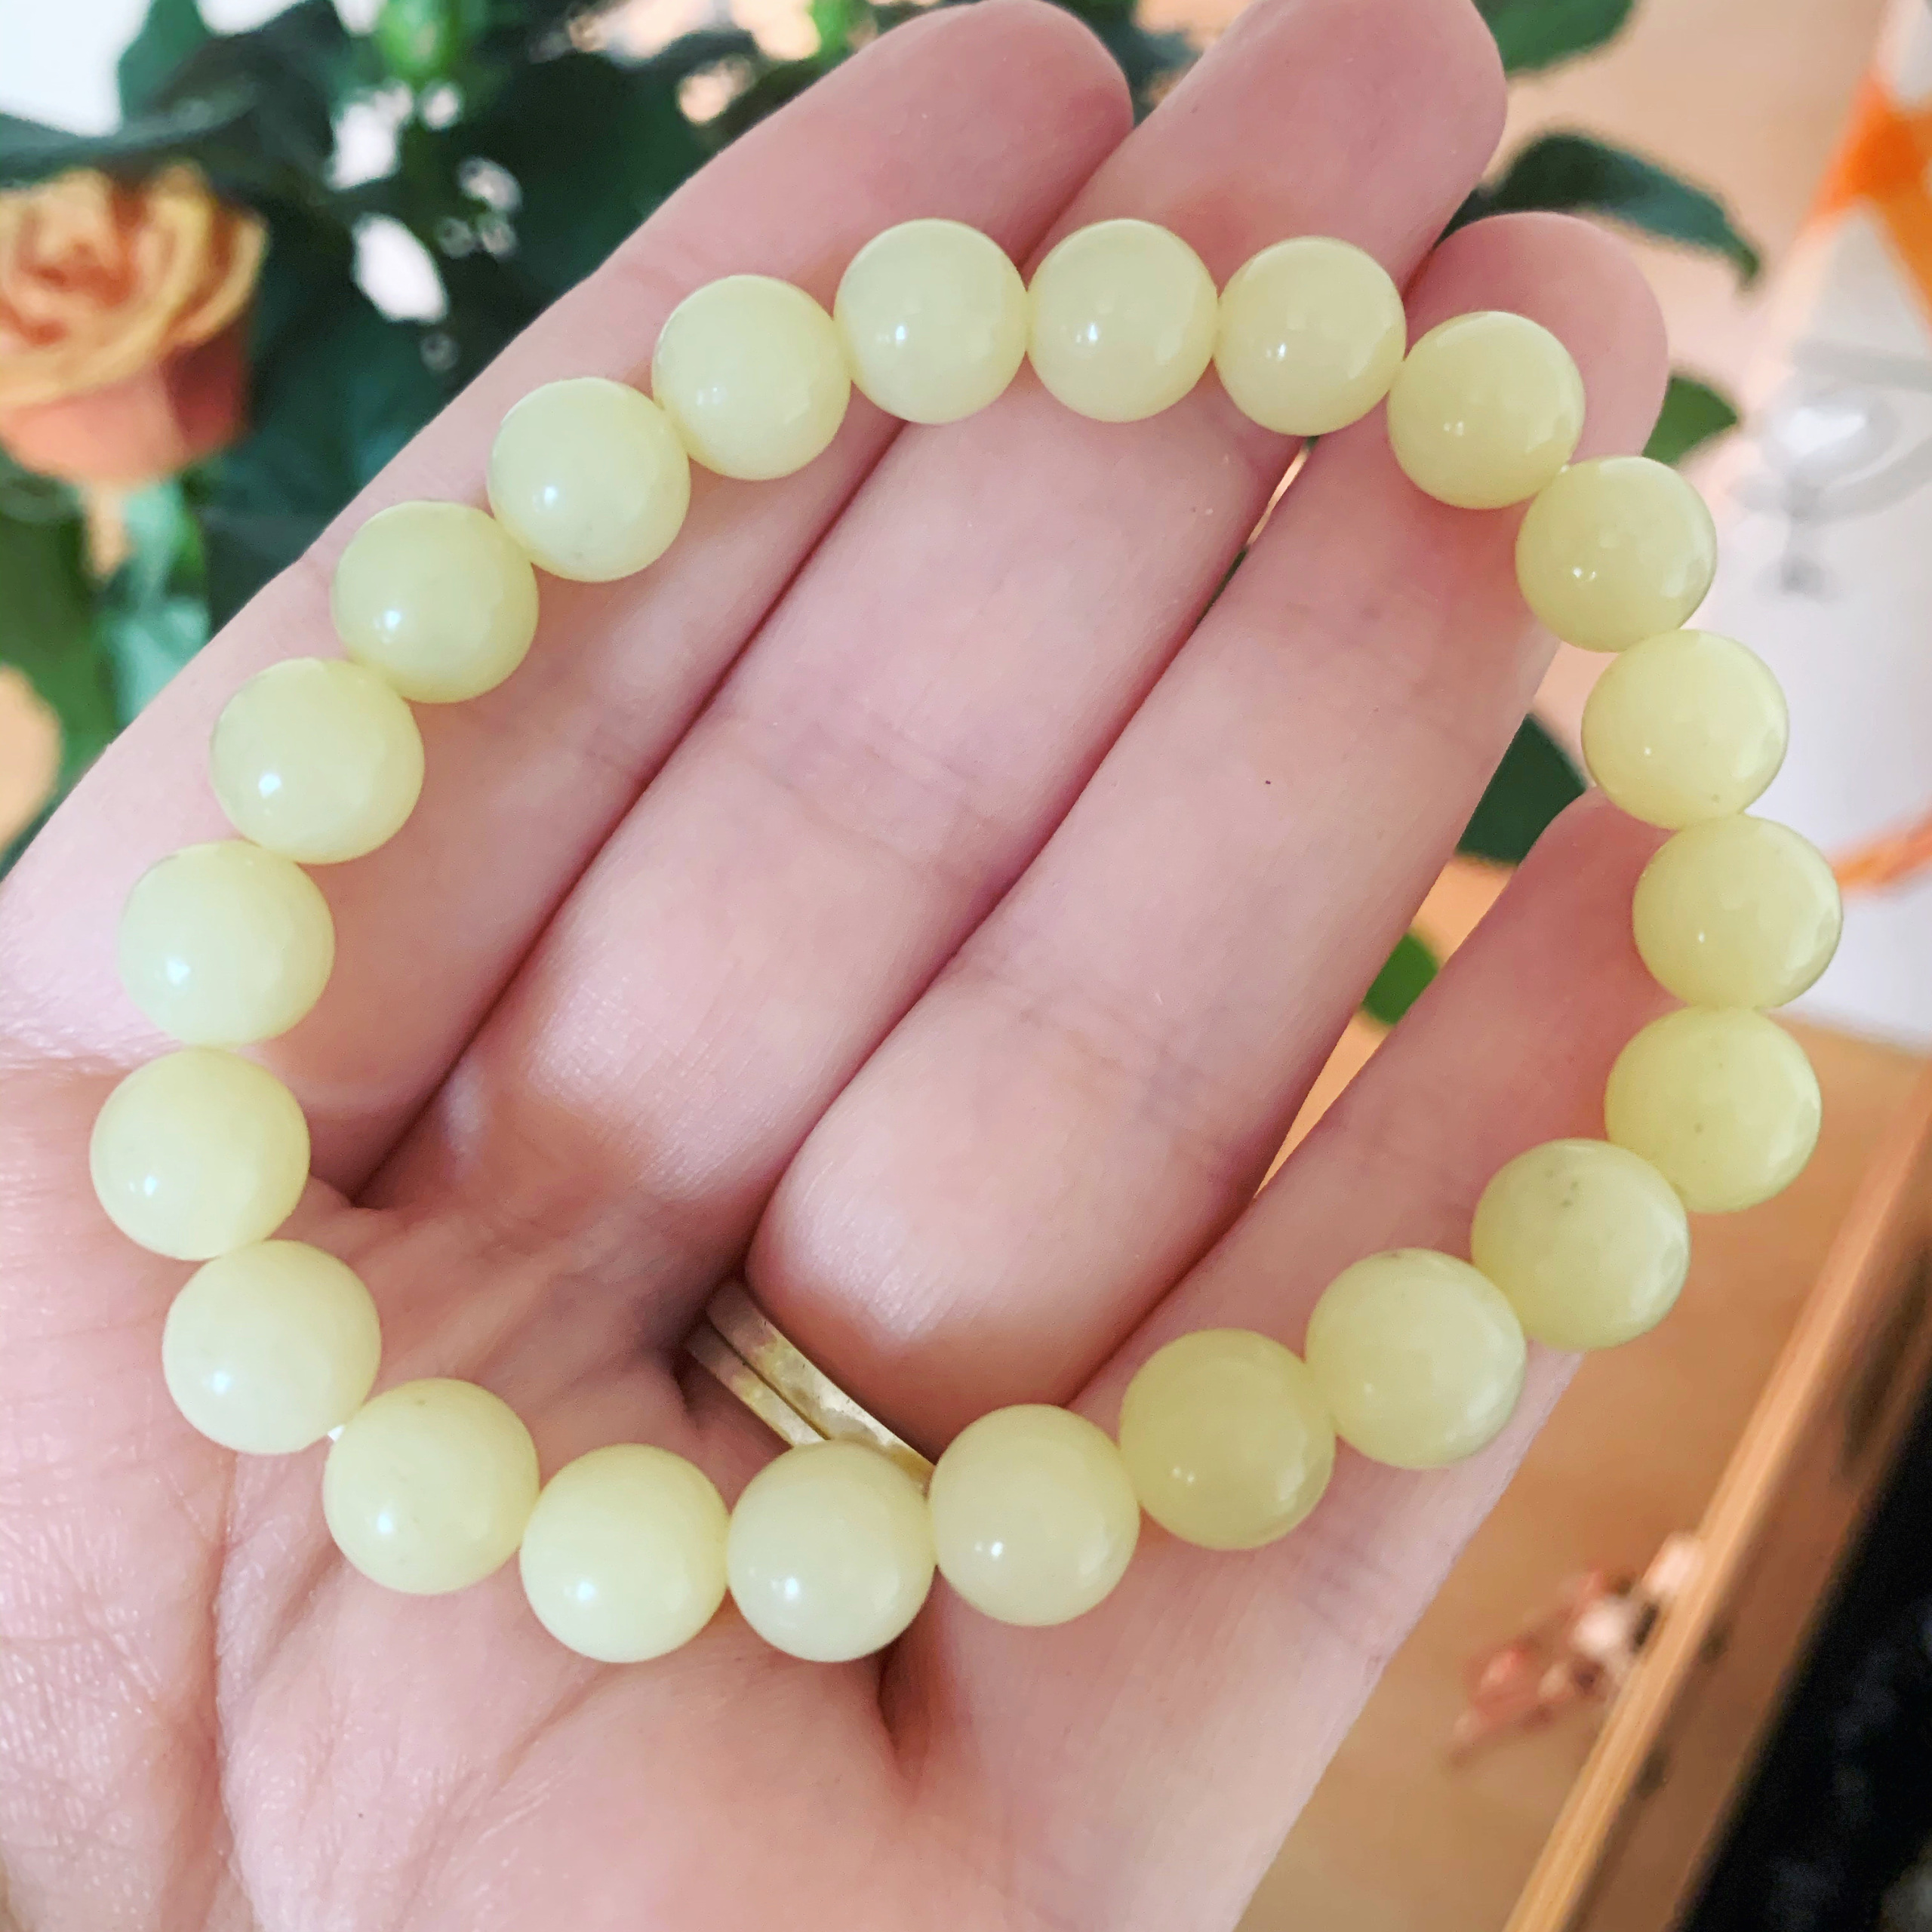 The Remarkable Jade Stone Meaning & Uses | Conscious Items